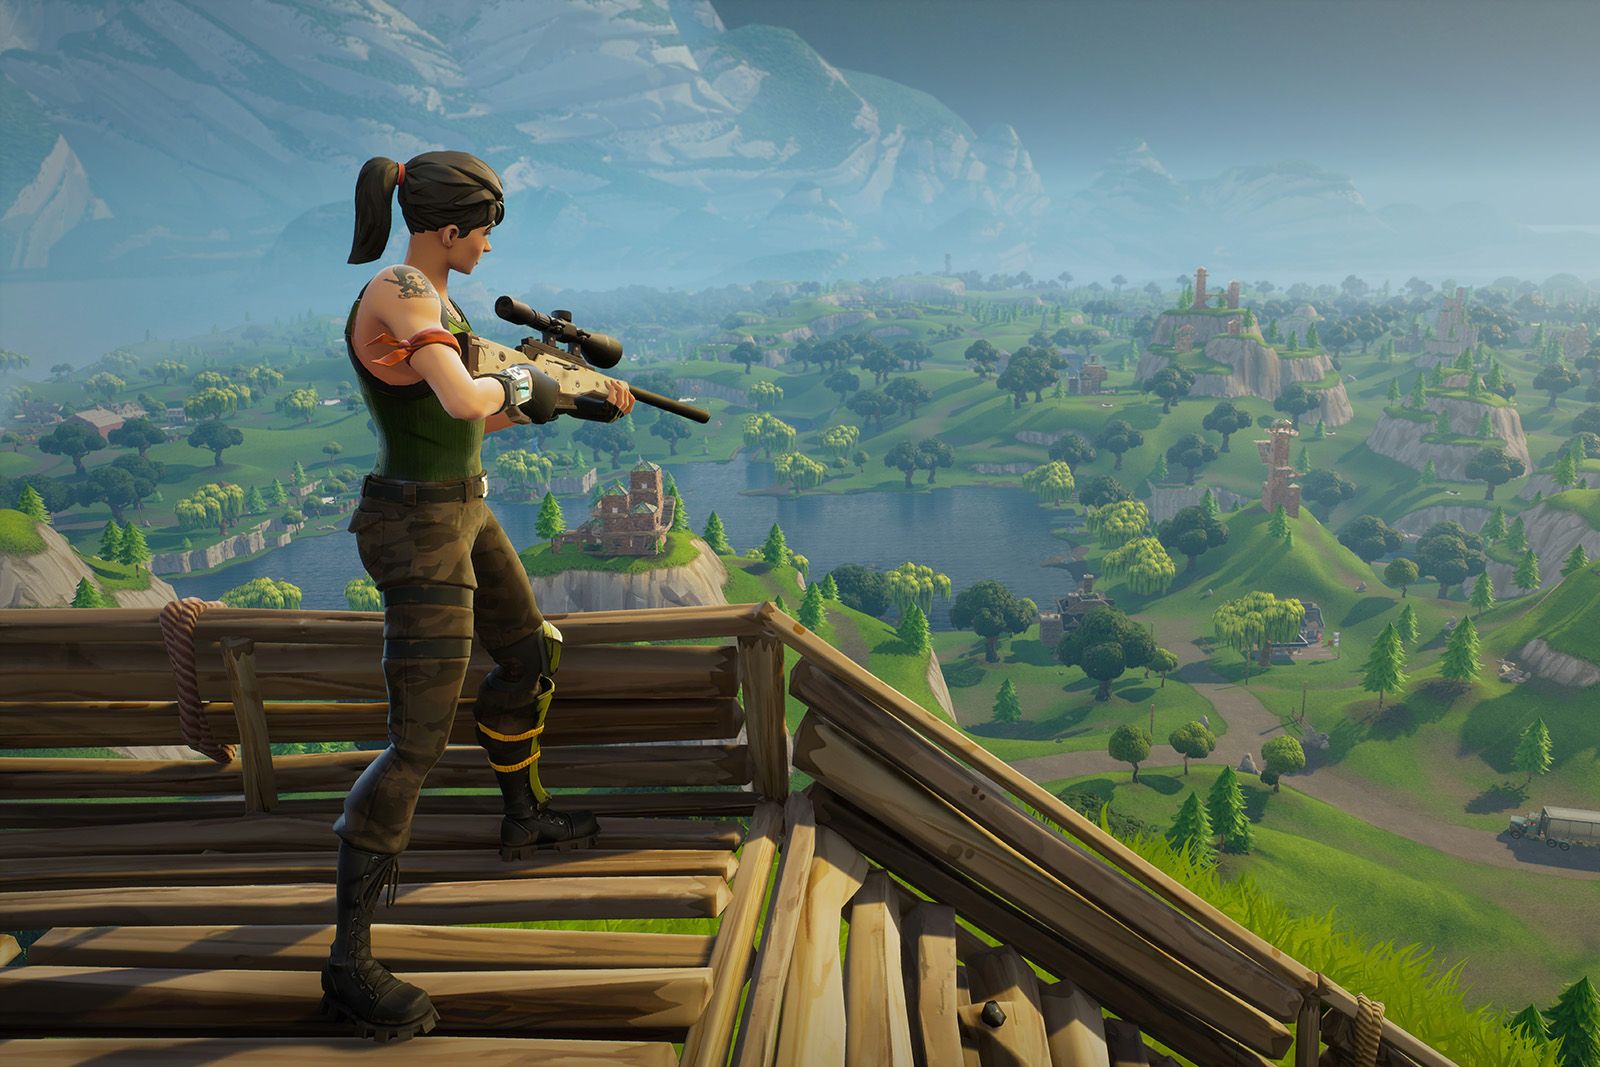 Fortnite Ps4 And Xbox One Players Now Be Grouped Together For Cross-play image 1